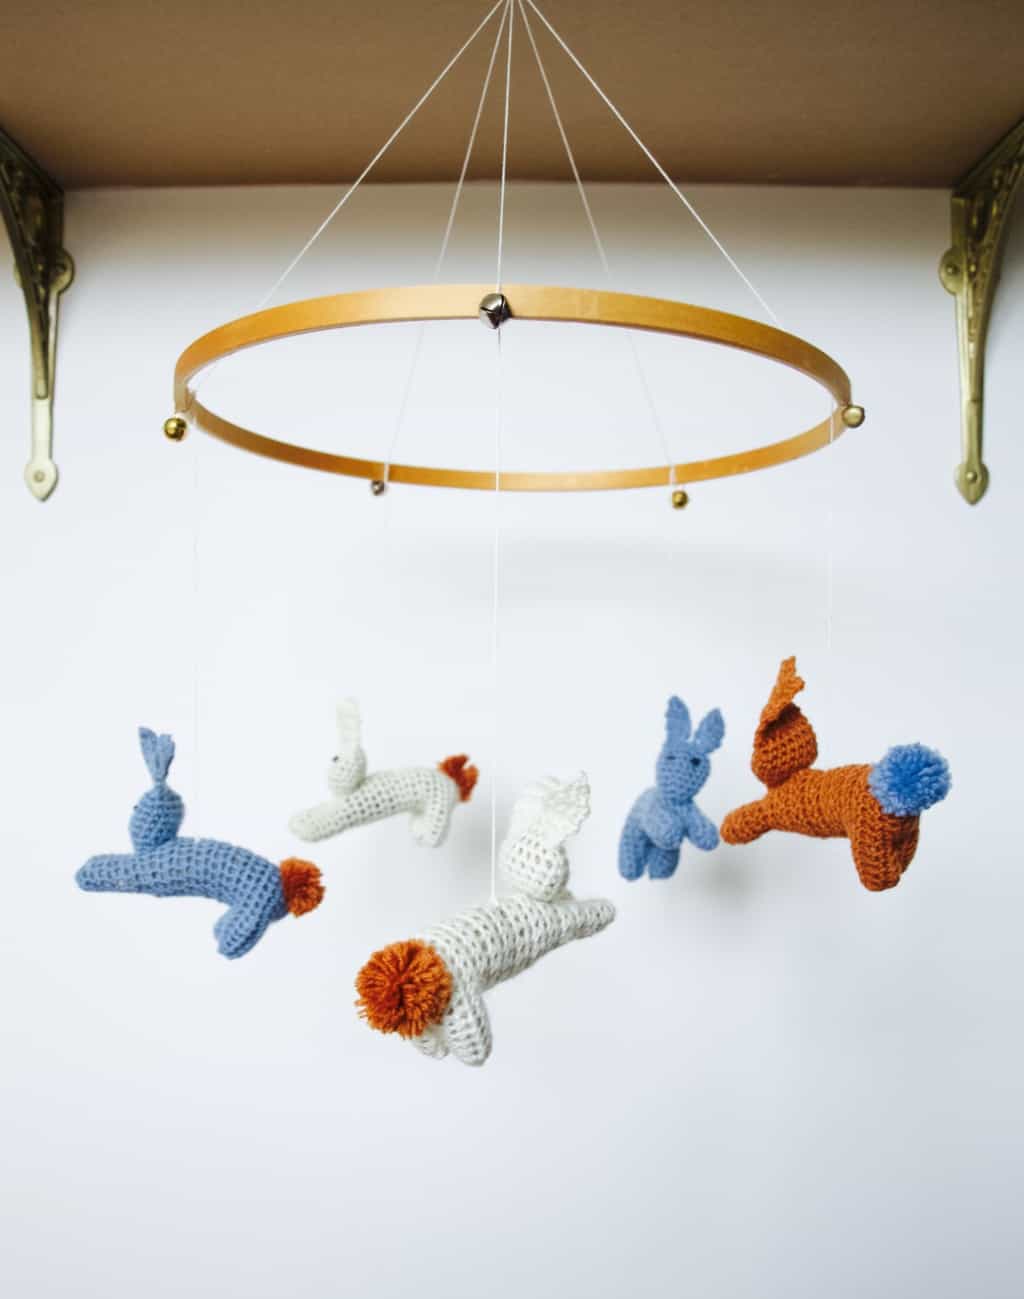 Jumping bunny baby mobile diy